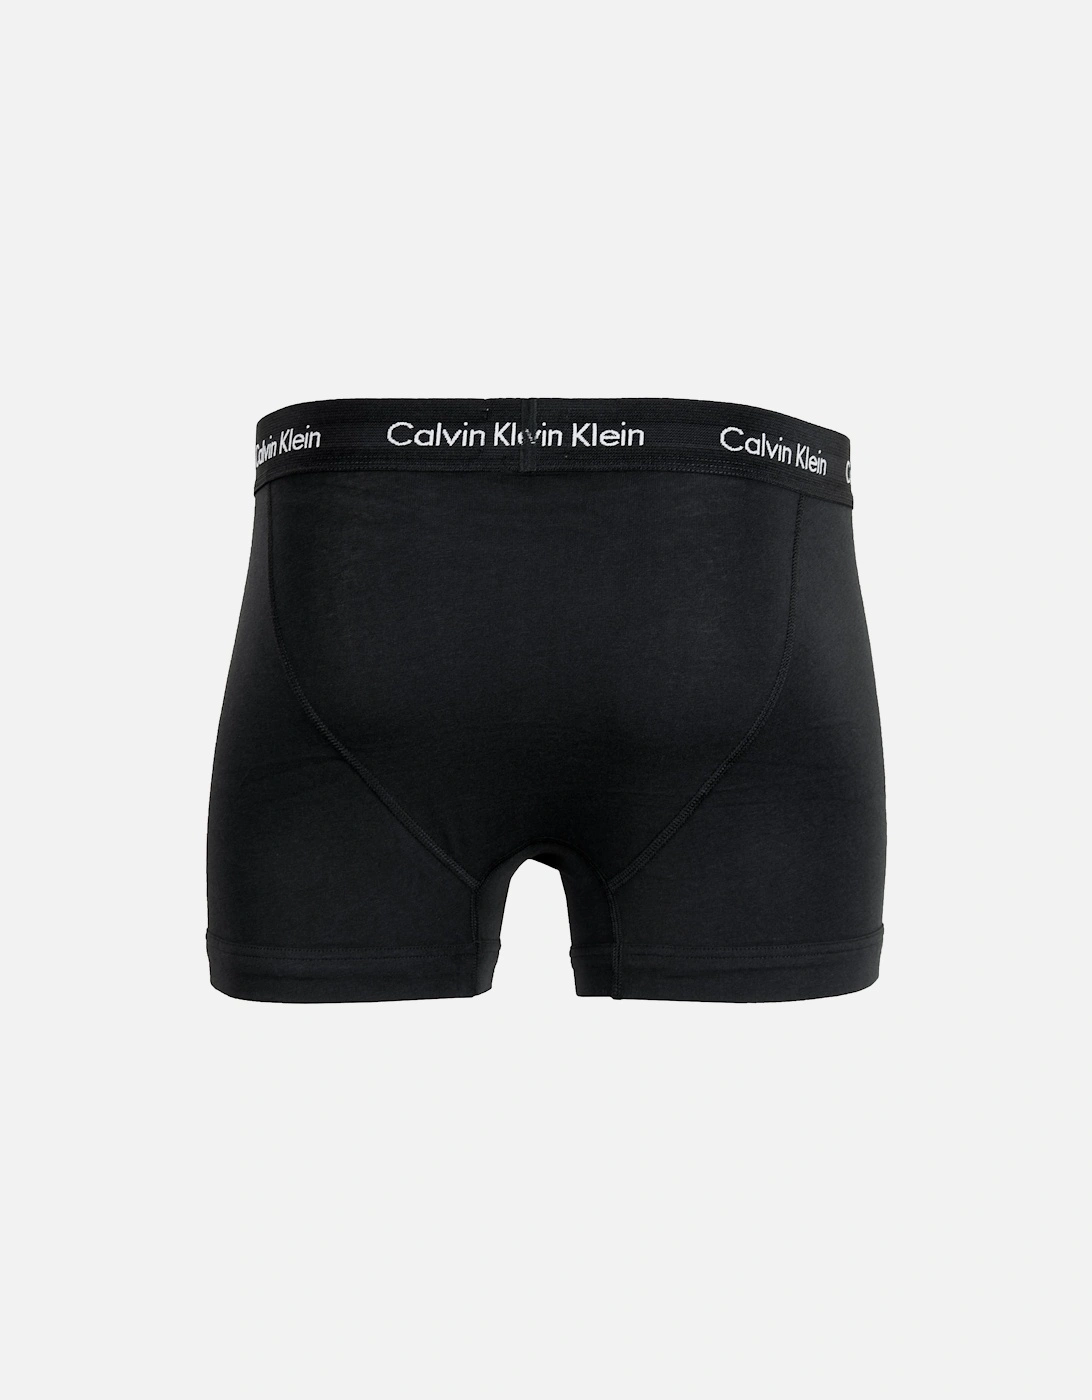 Mens 3 Pack Contrast Band Boxers (Black)